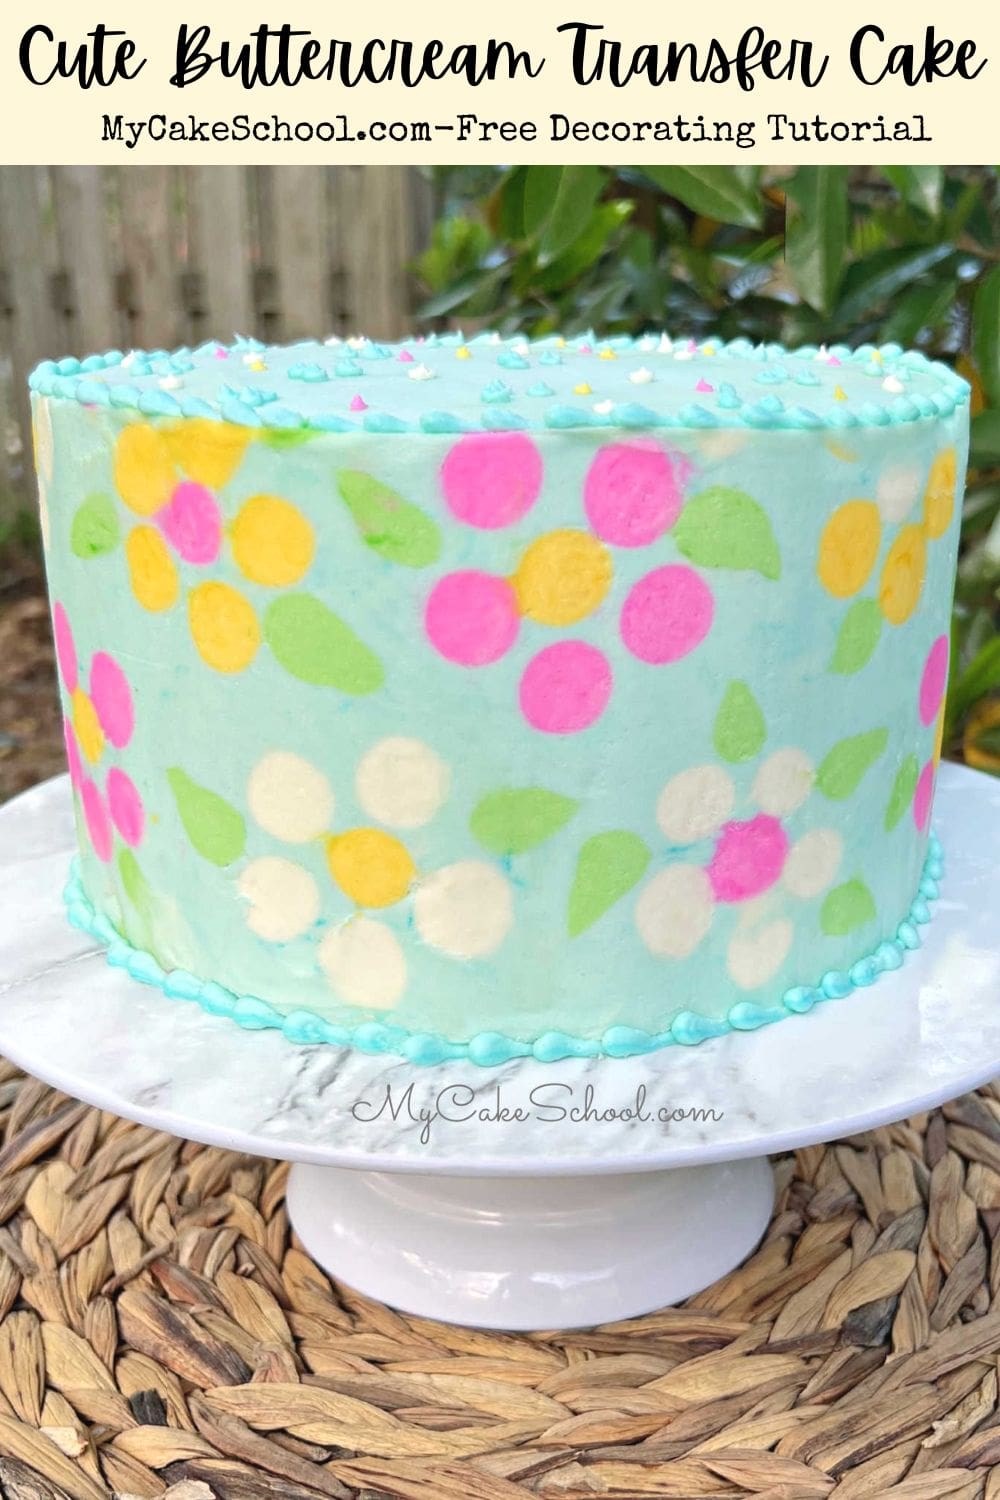 Buttercream-frosted cake, blue with colorful daisies-smooth finish.